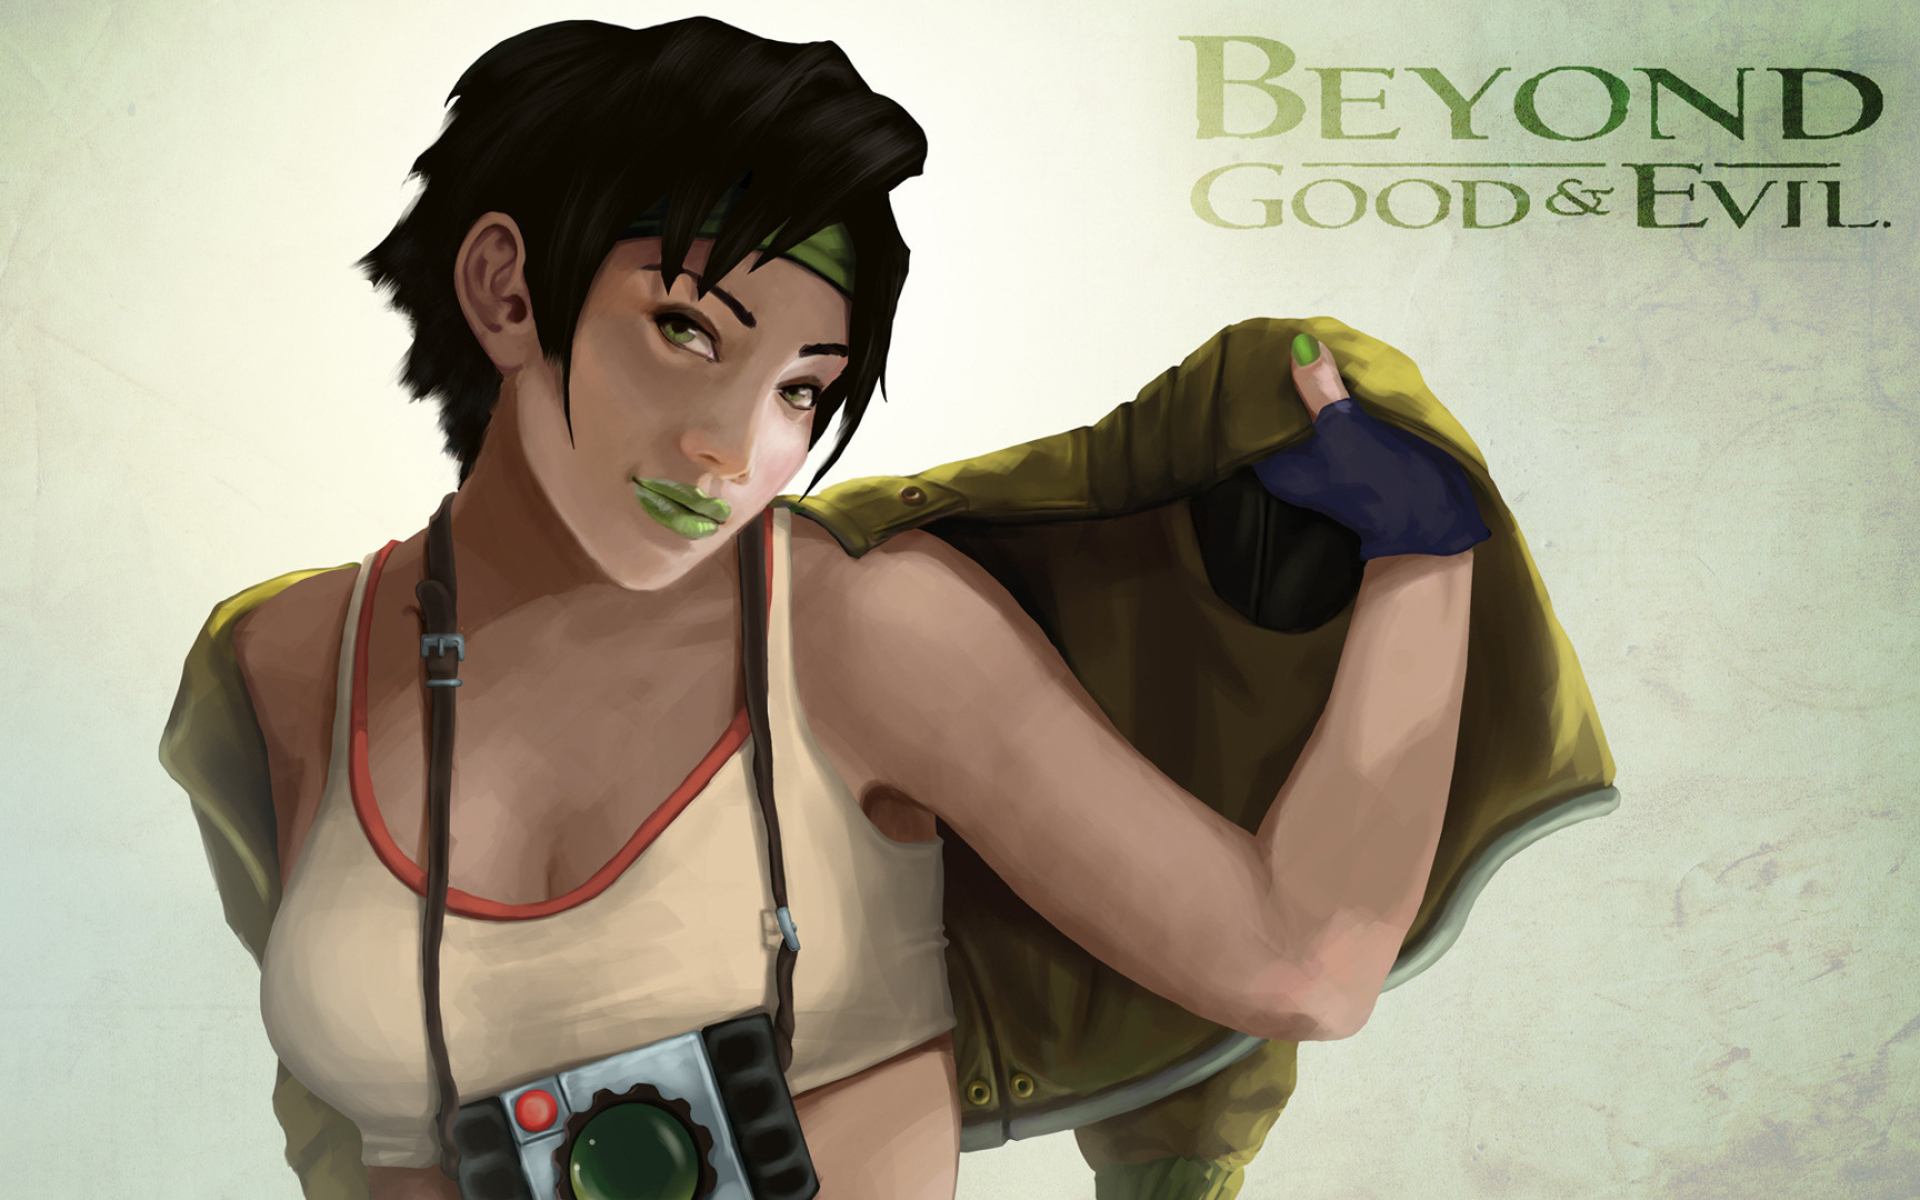 Jade Beyond Good and Evil wallpaper, Strong female protagonist, Enigmatic world, Gaming art, 1920x1200 HD Desktop